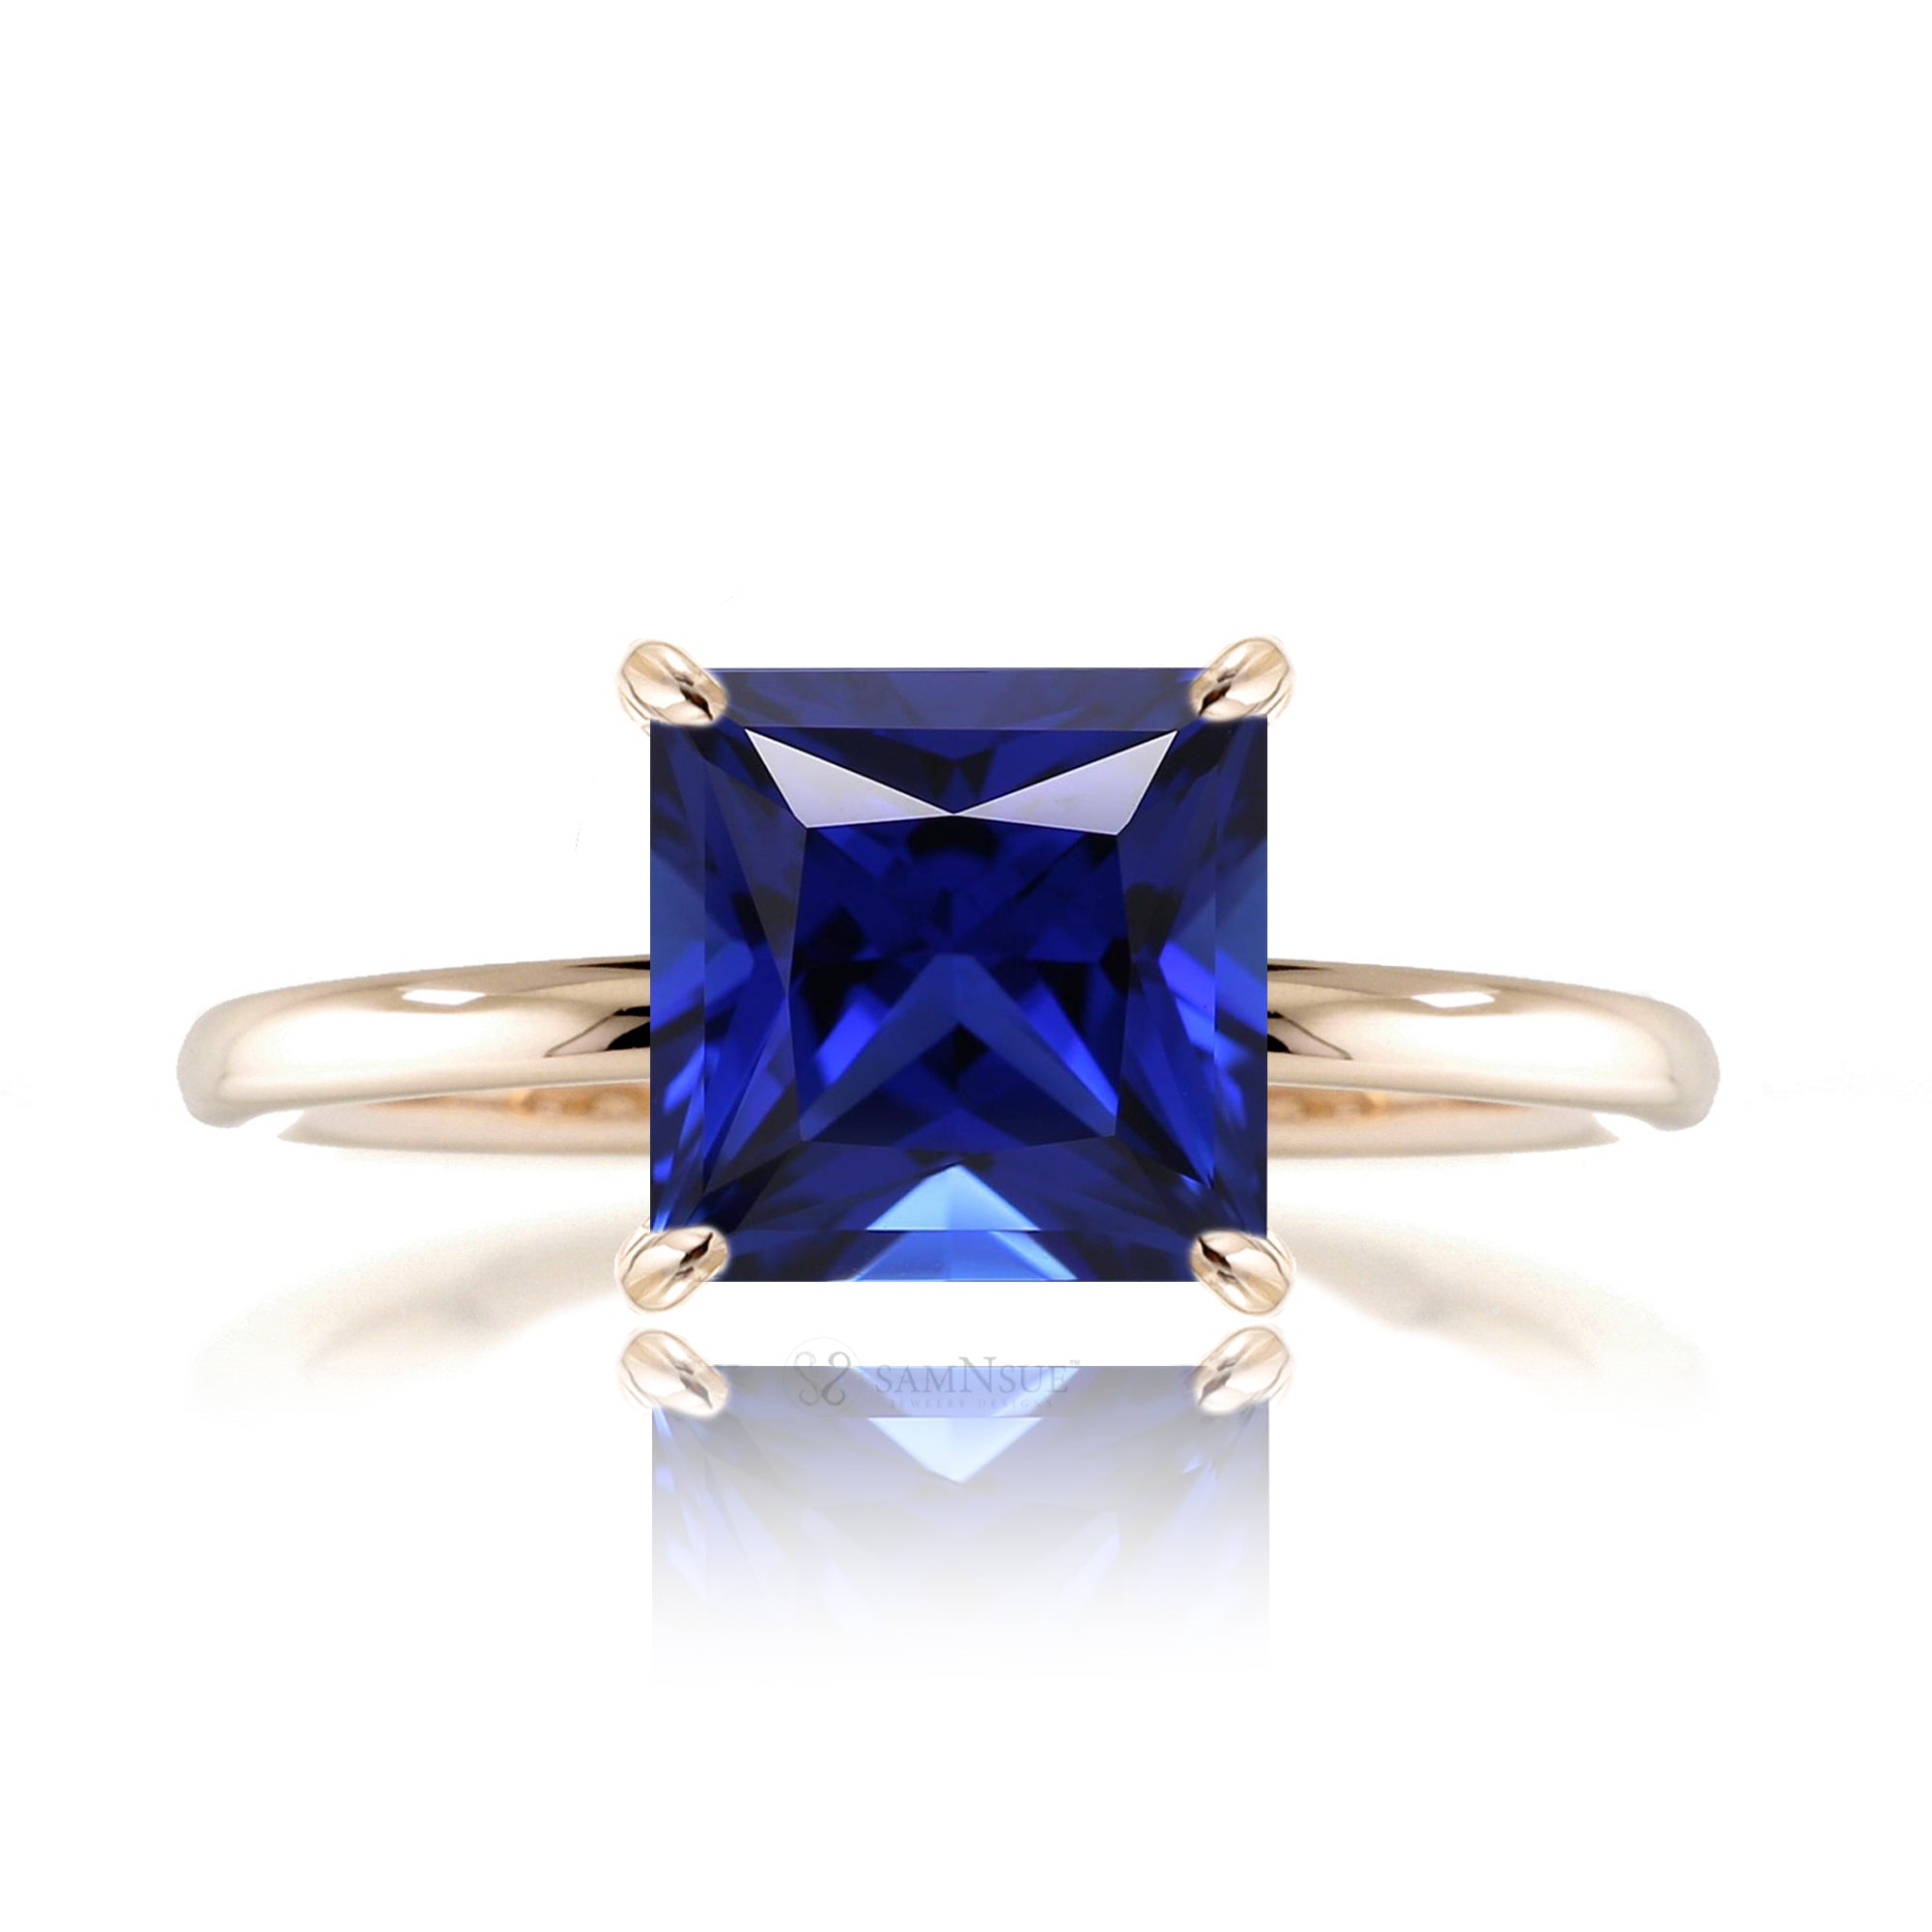 Princess cut blue sapphire diamond engagement ring yellow gold solid band - the Ava